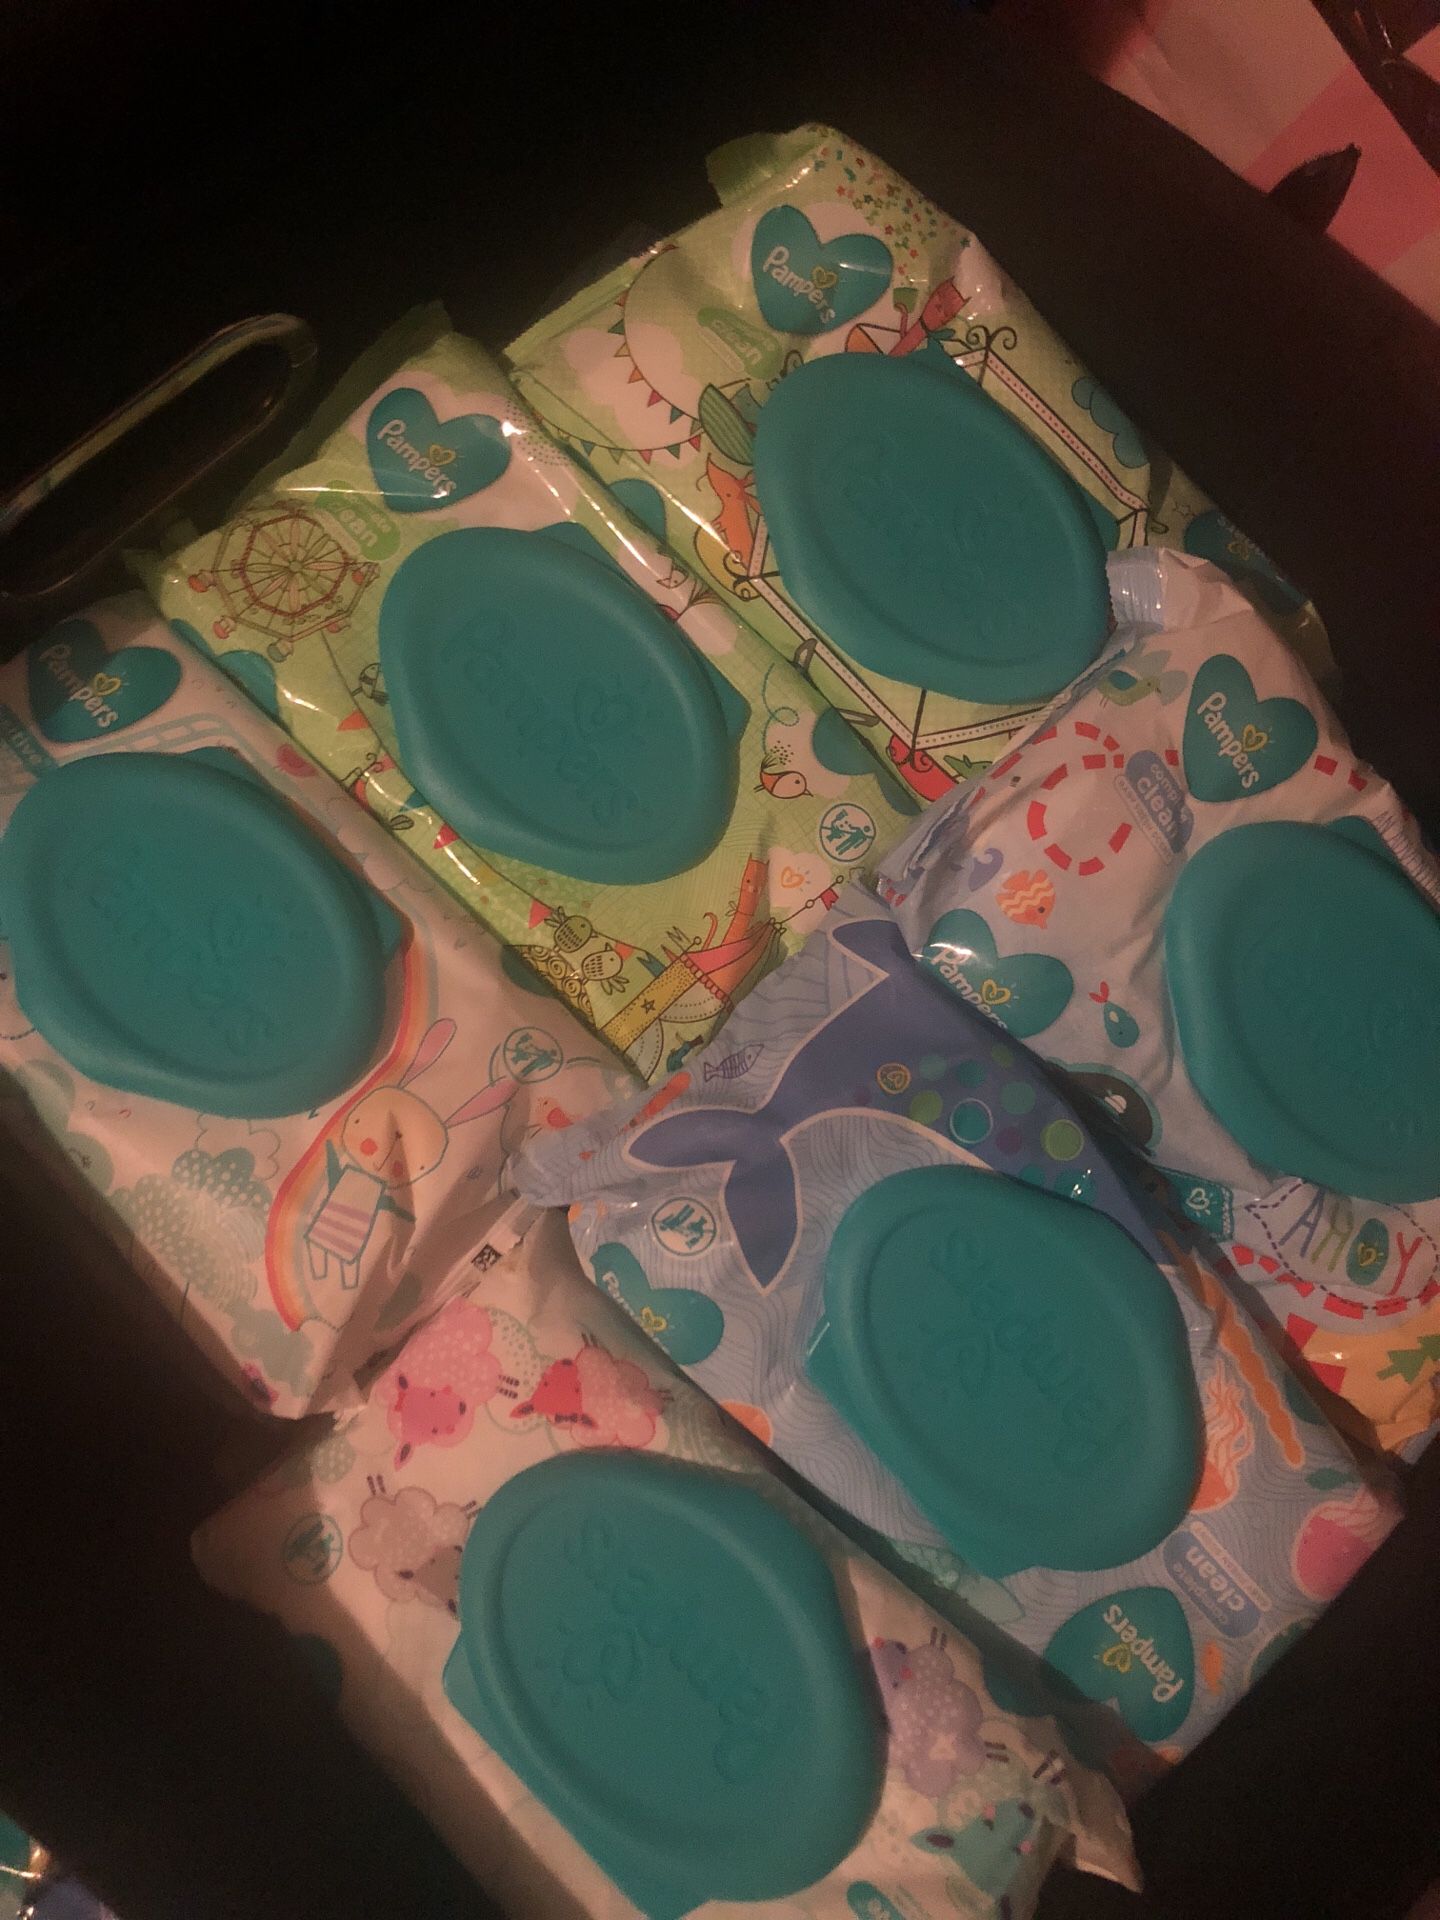 Wipes, baby wipes, pampers wipes, pampers, baby, 65 bags available for 3.50 each